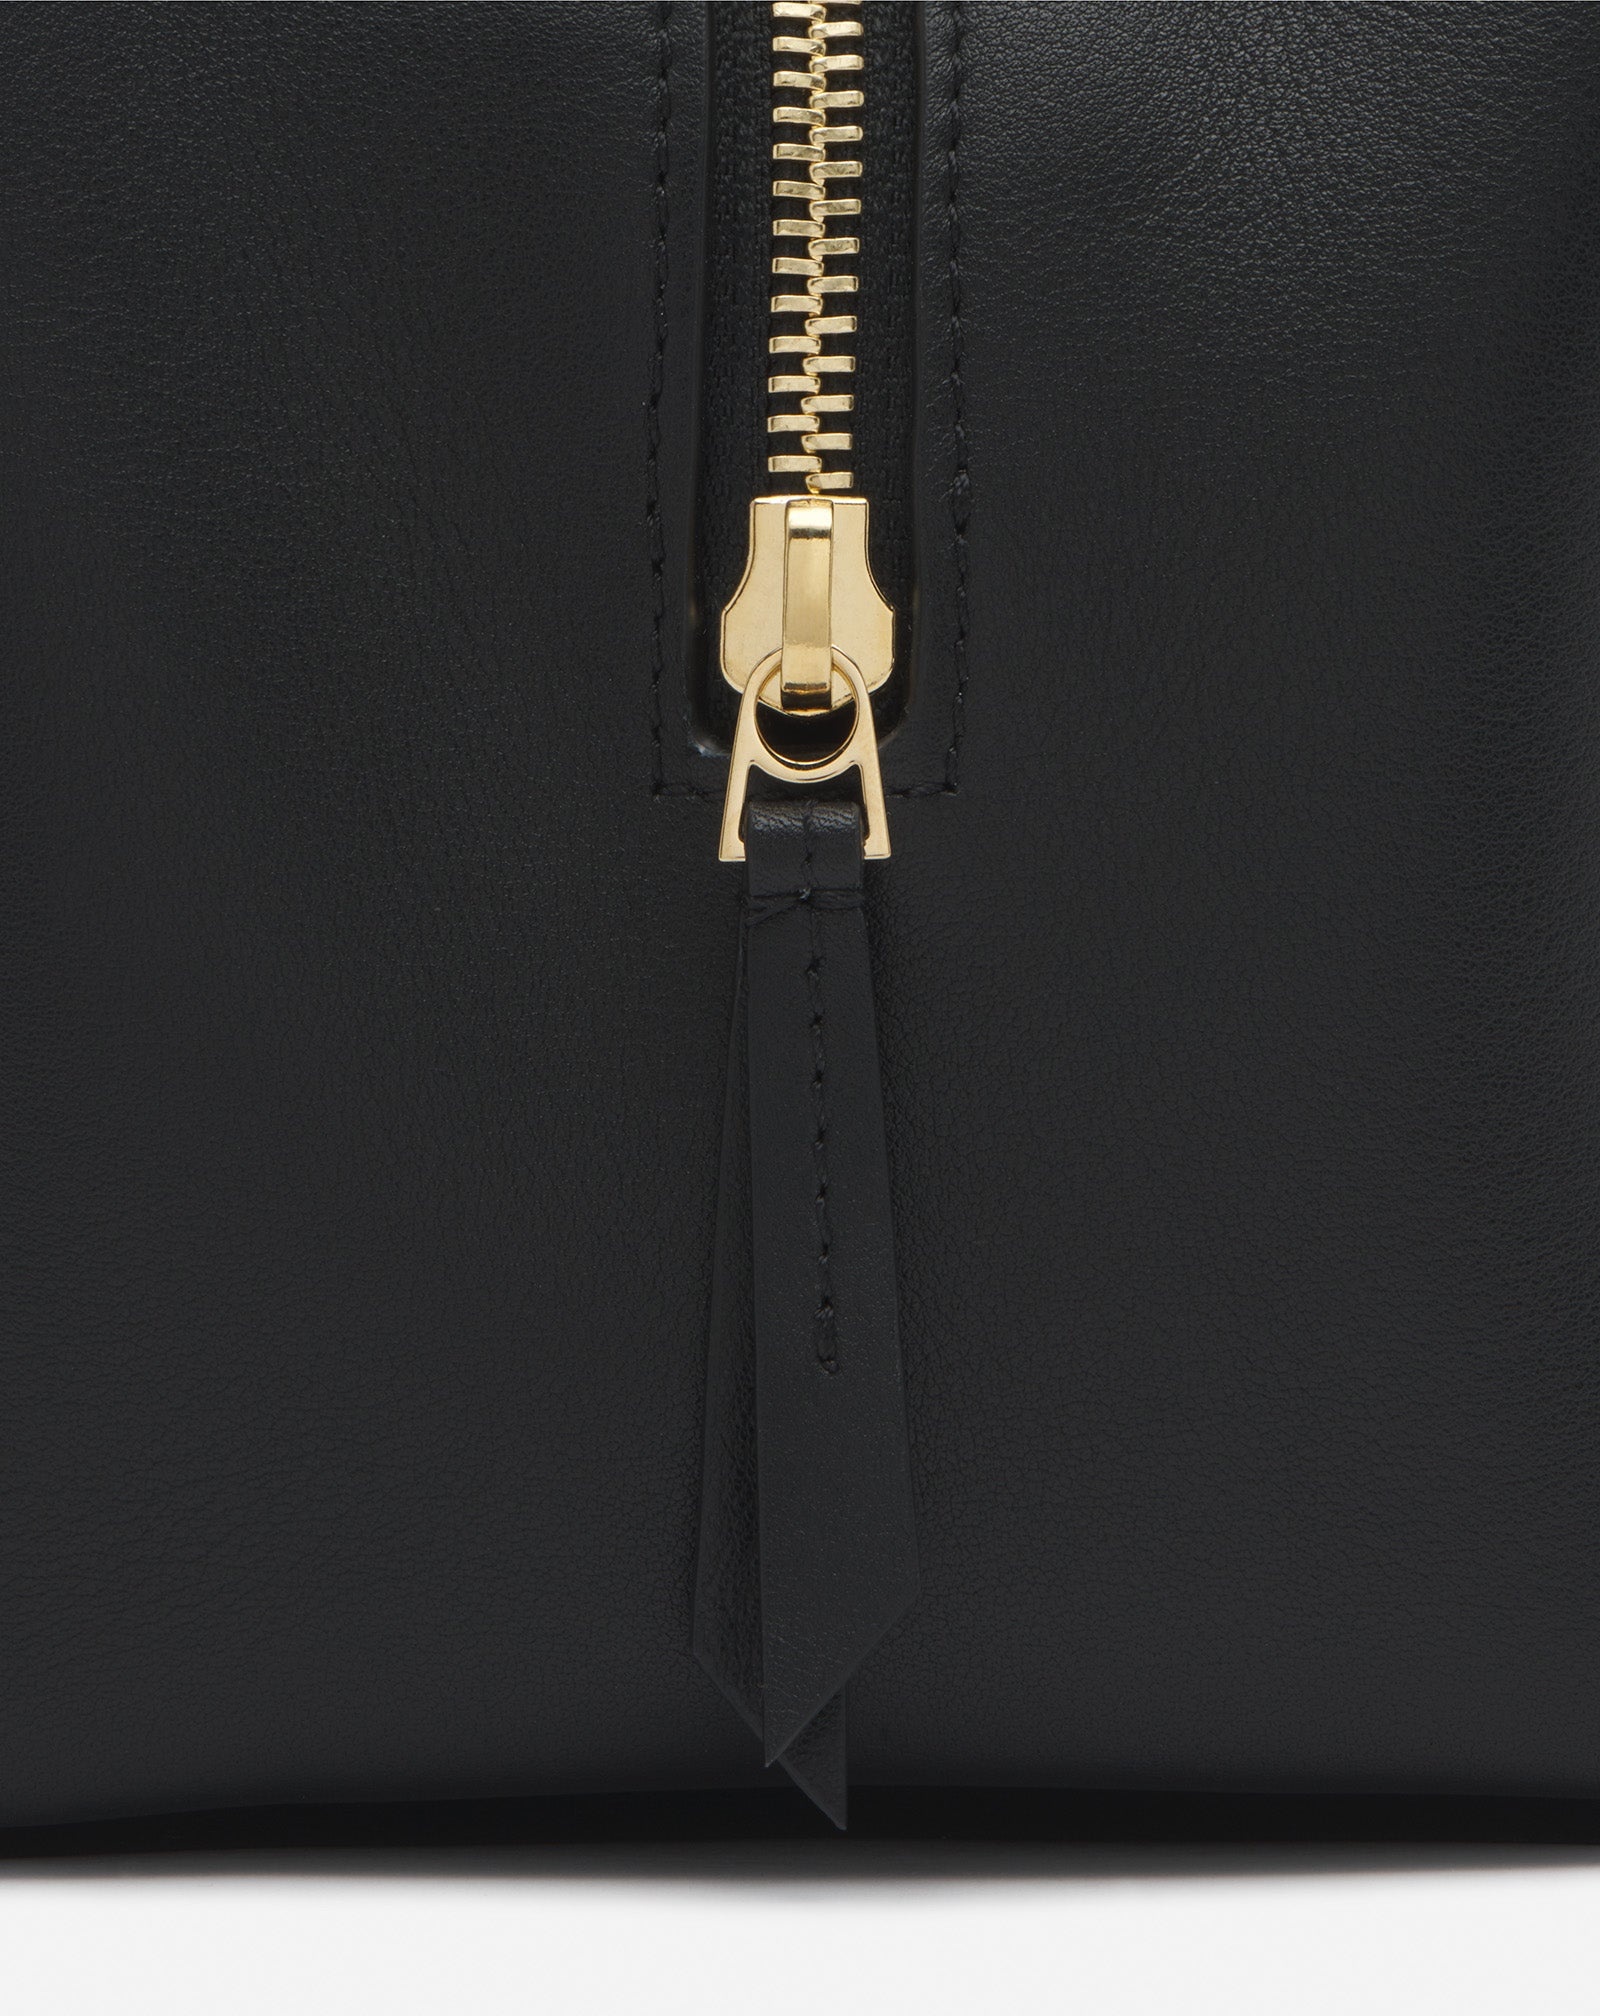 TEMPO BY LANVIN LEATHER BAG WITH SEQUENCE BY LANVIN CHAIN - 6